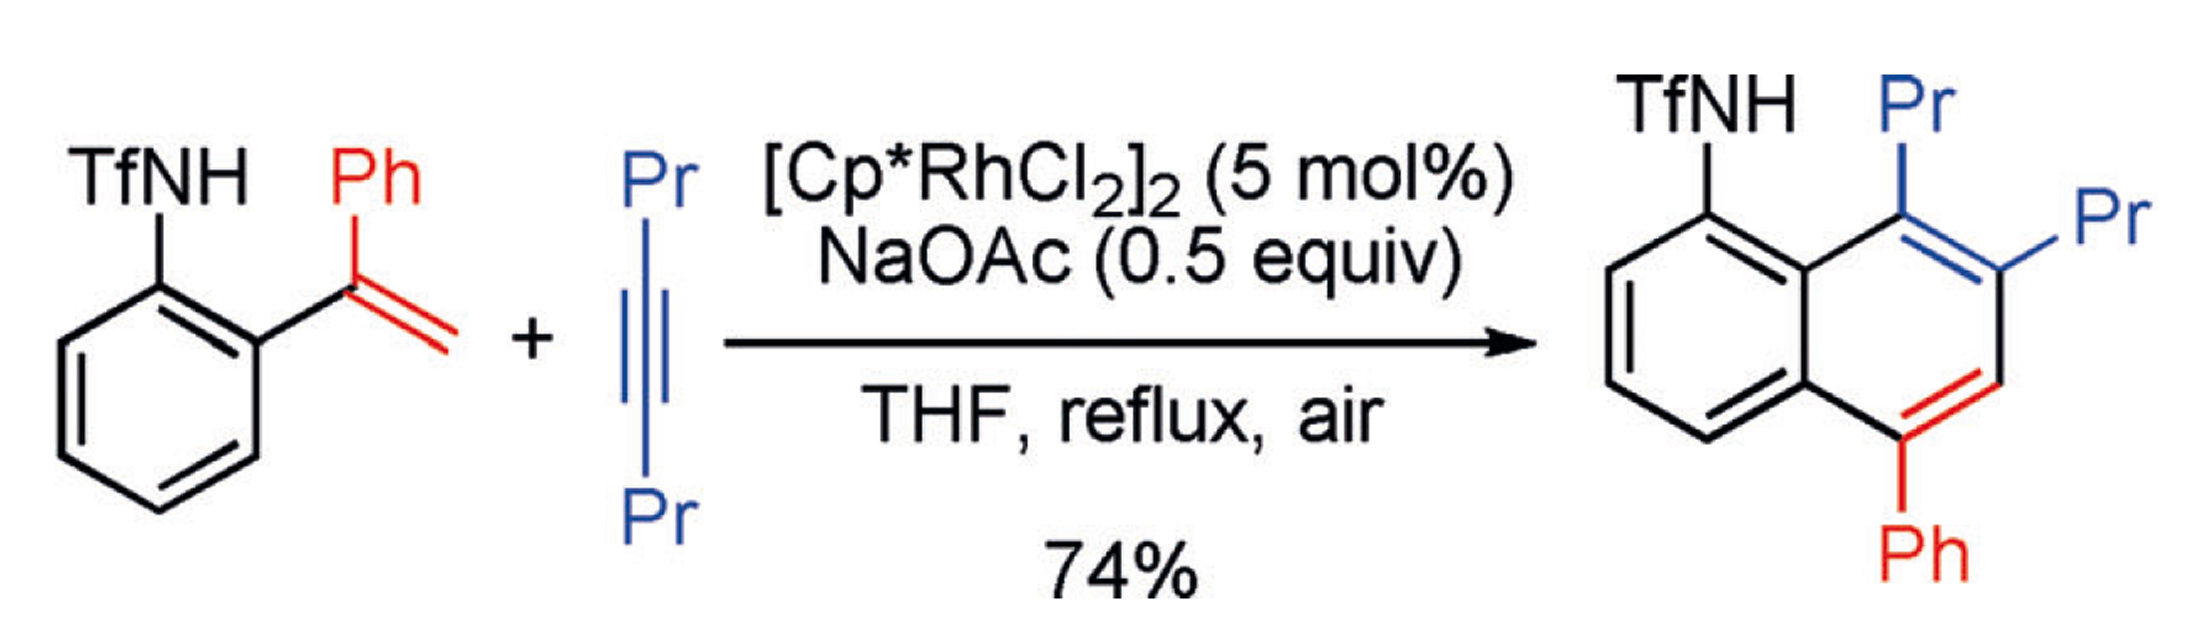 Rhodium‐catalyzed annulation of ortho‐alkenylanilides with alkynes: Formation of unexpected naphthalene adducts